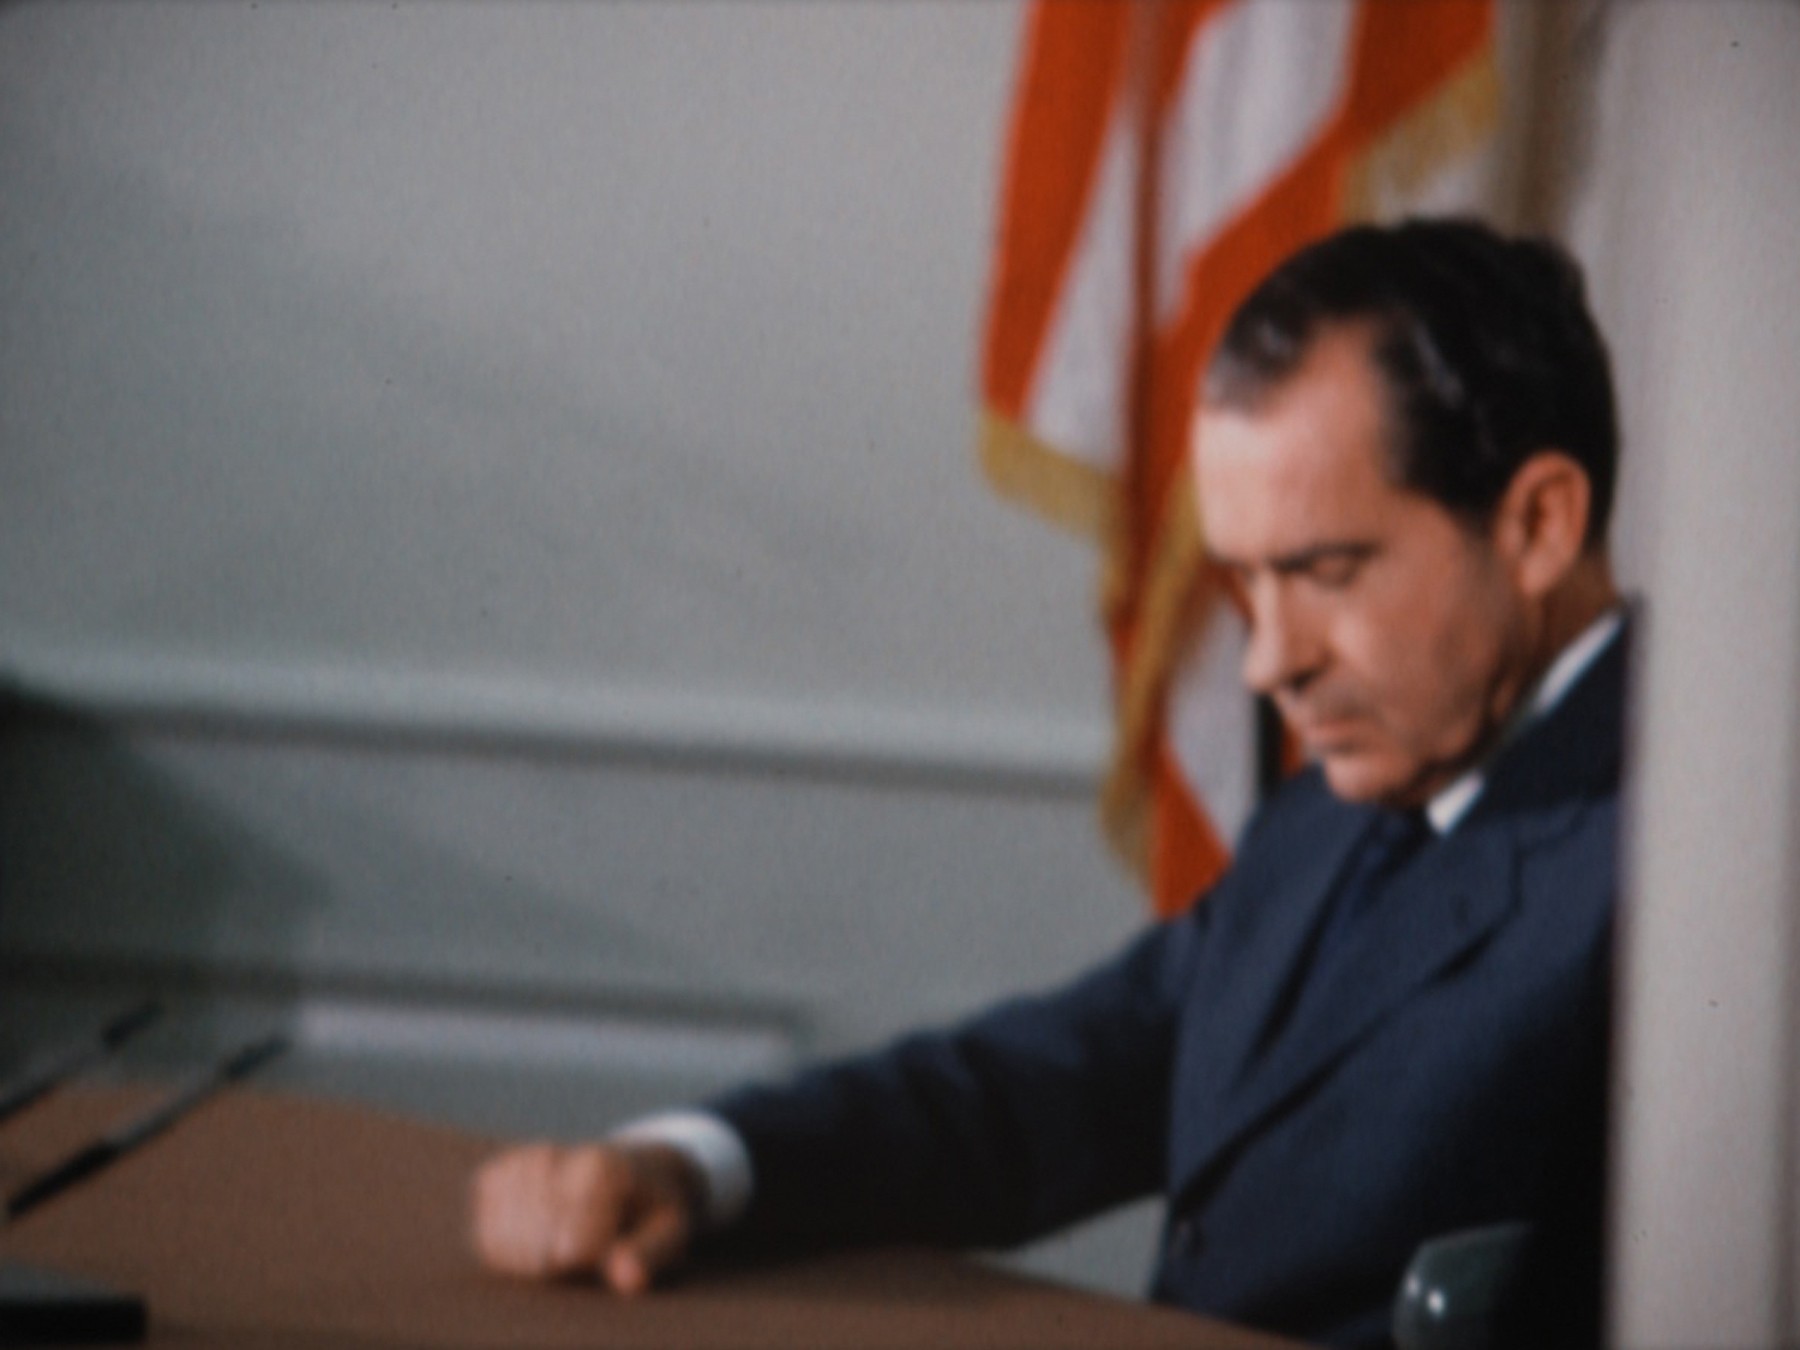 President Nixon in the Oval Office preparing for his historic phone call to Apollo 11 astronauts Neil Armstrong and Buzz Aldrin, who were at that very moment landing on the moon (July 20, 1969)